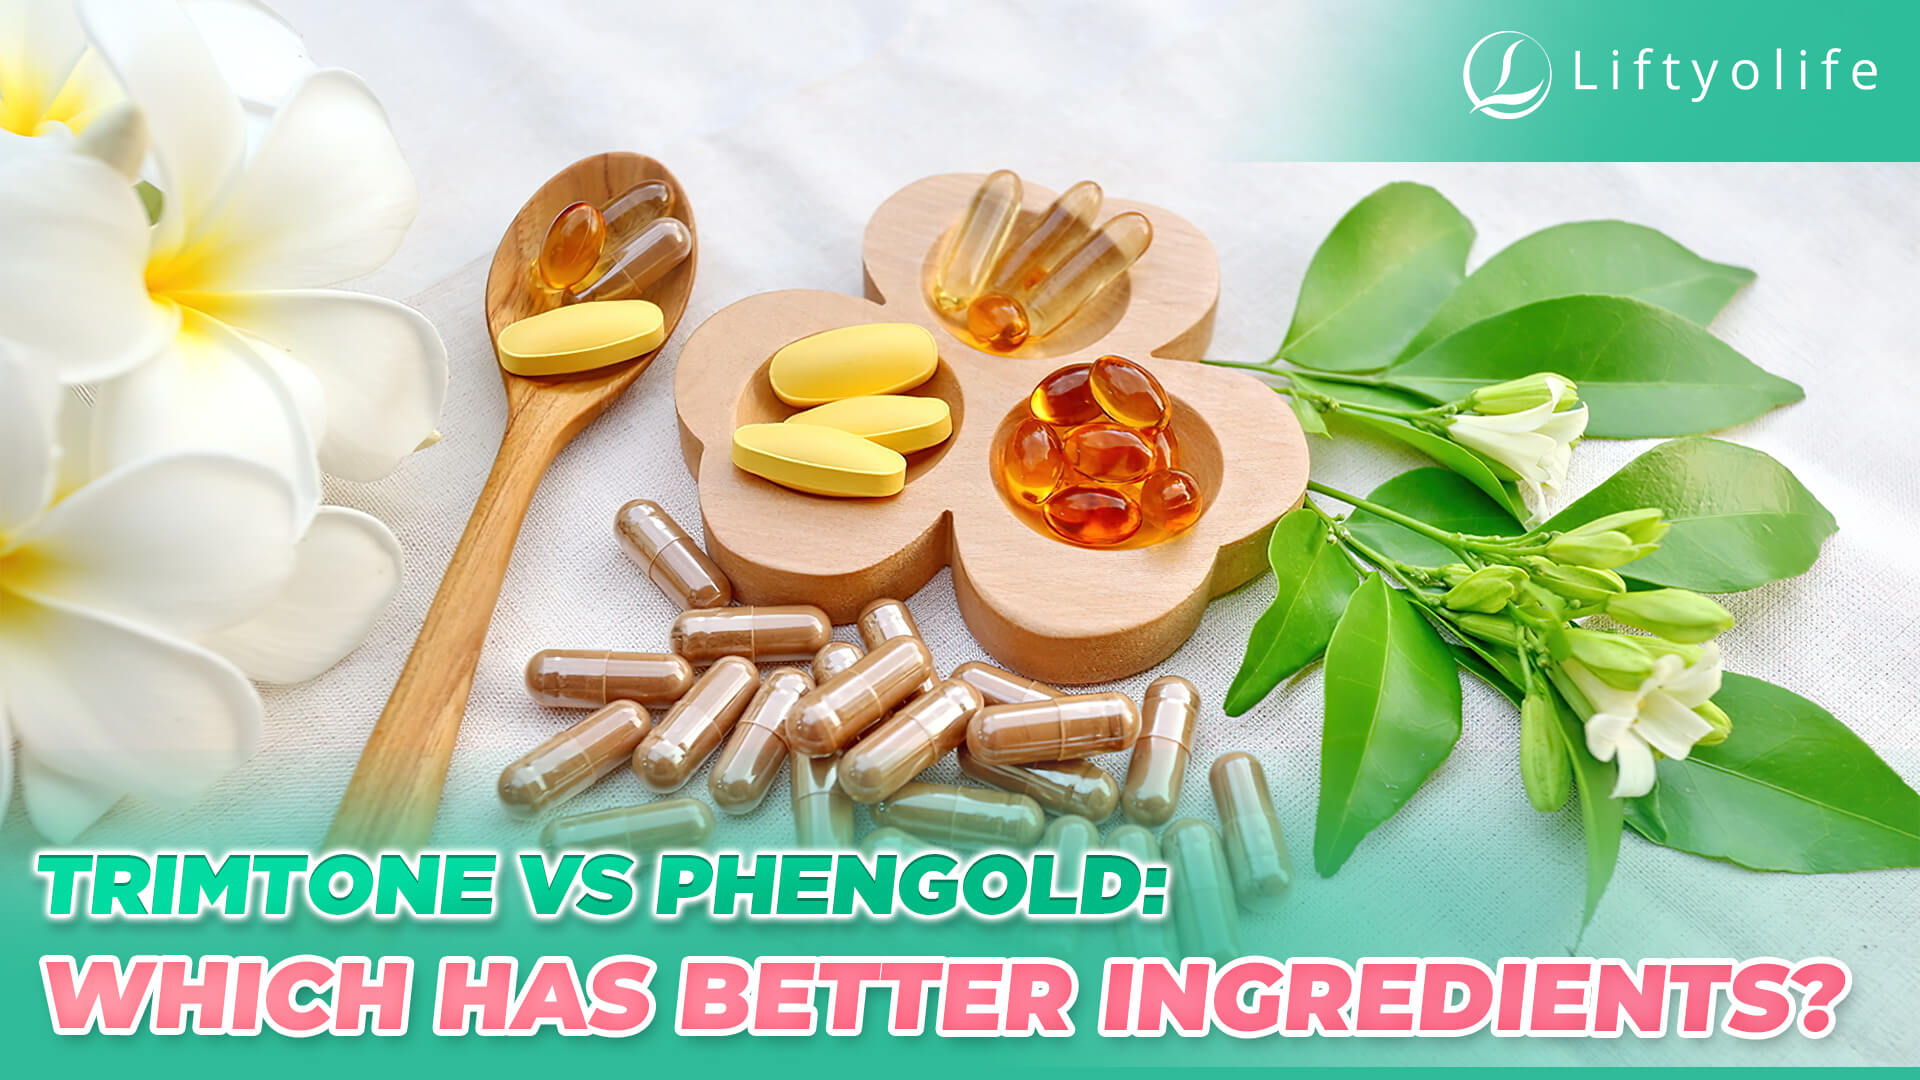 Trimtone vs PhenGold: Which has better ingredients?